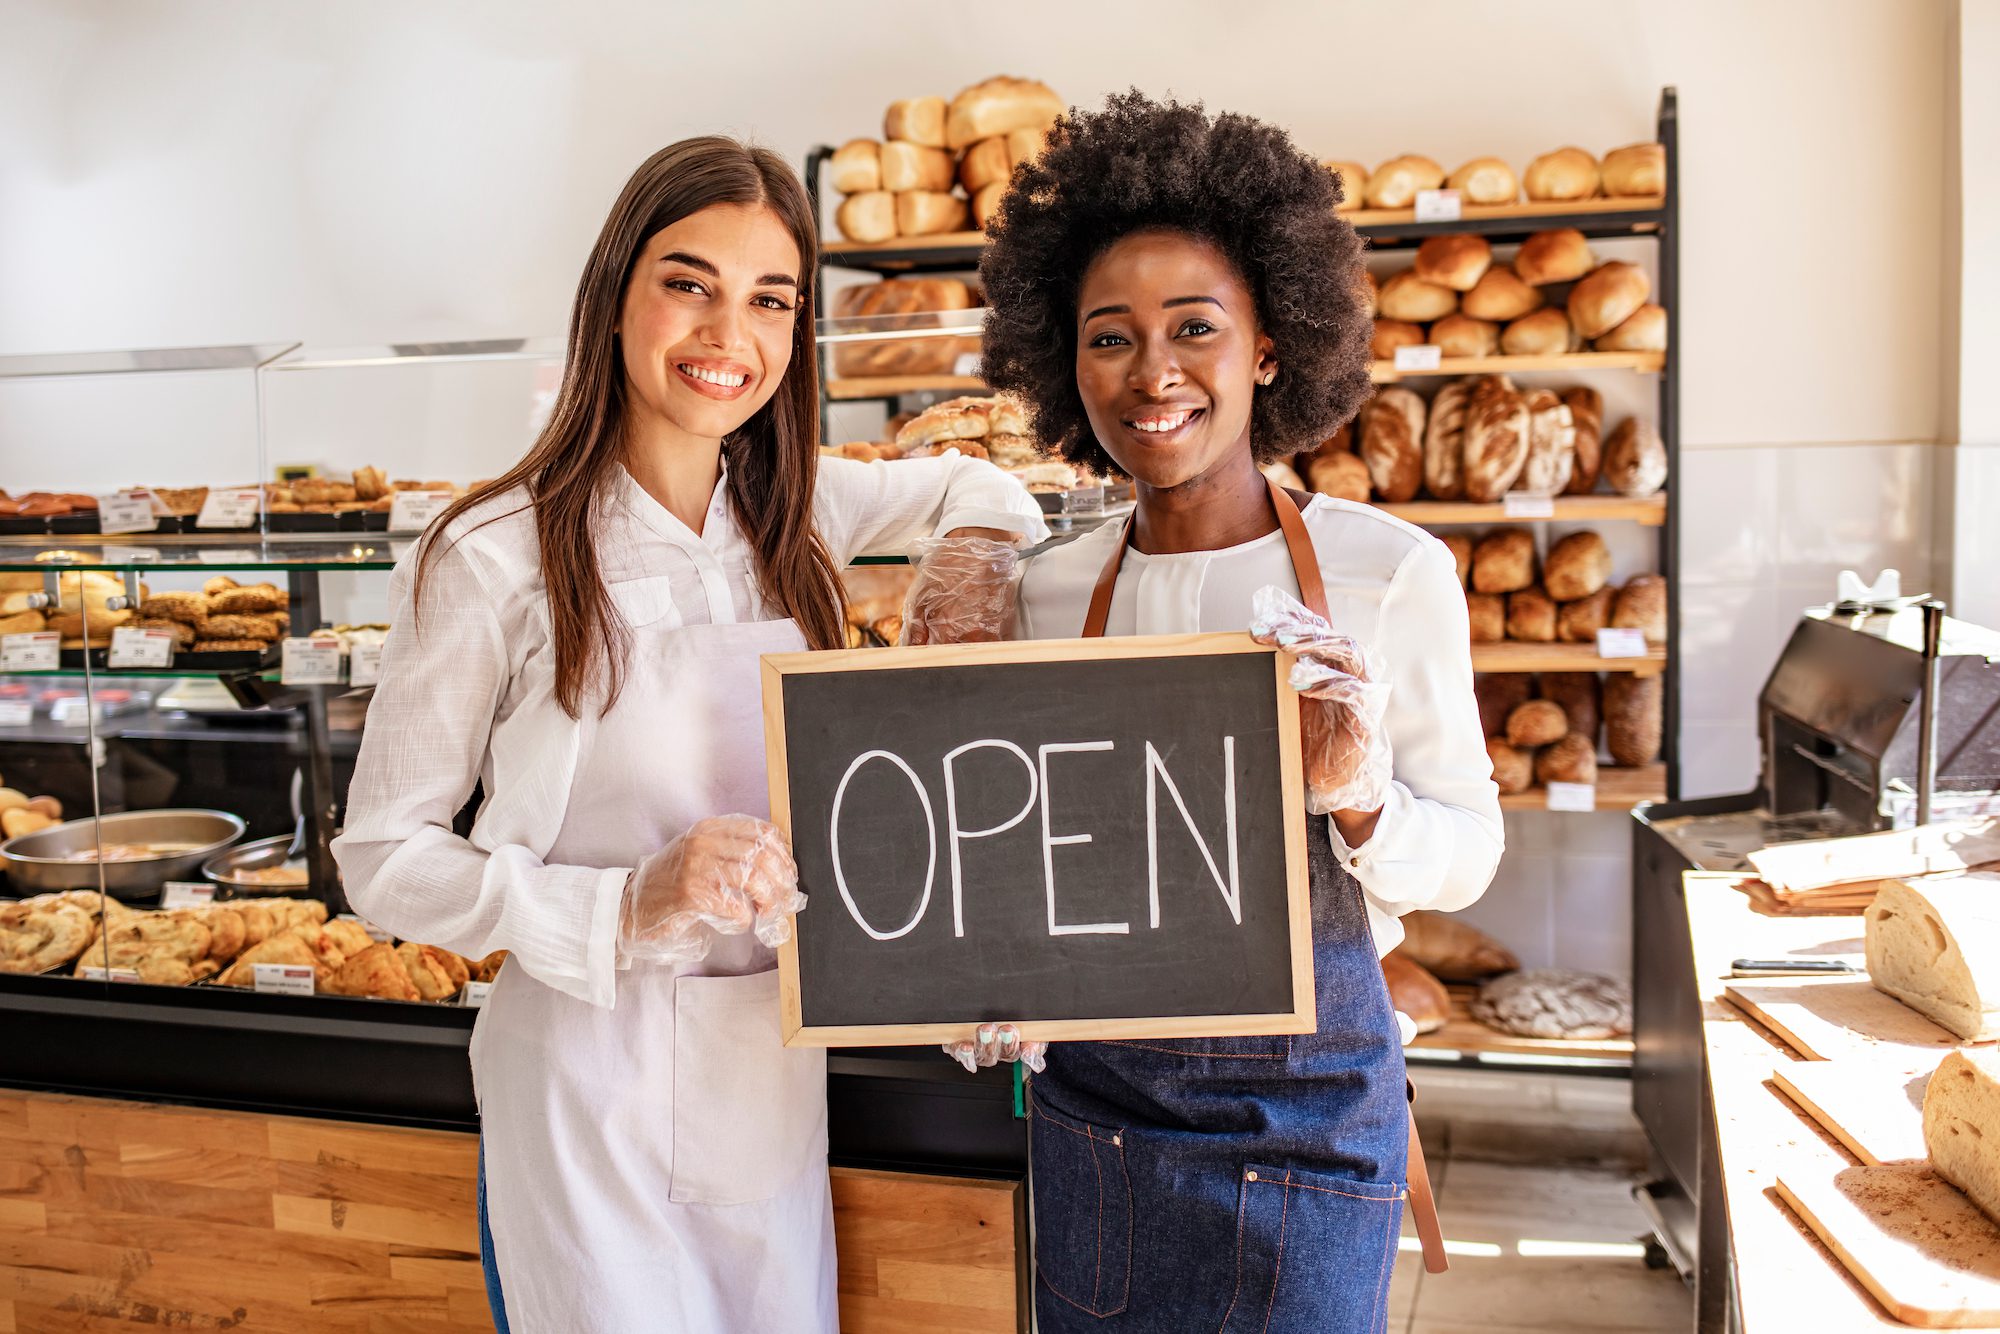 Shop women-owned businesses | Photo by Dragana Gordic/Shutterstock